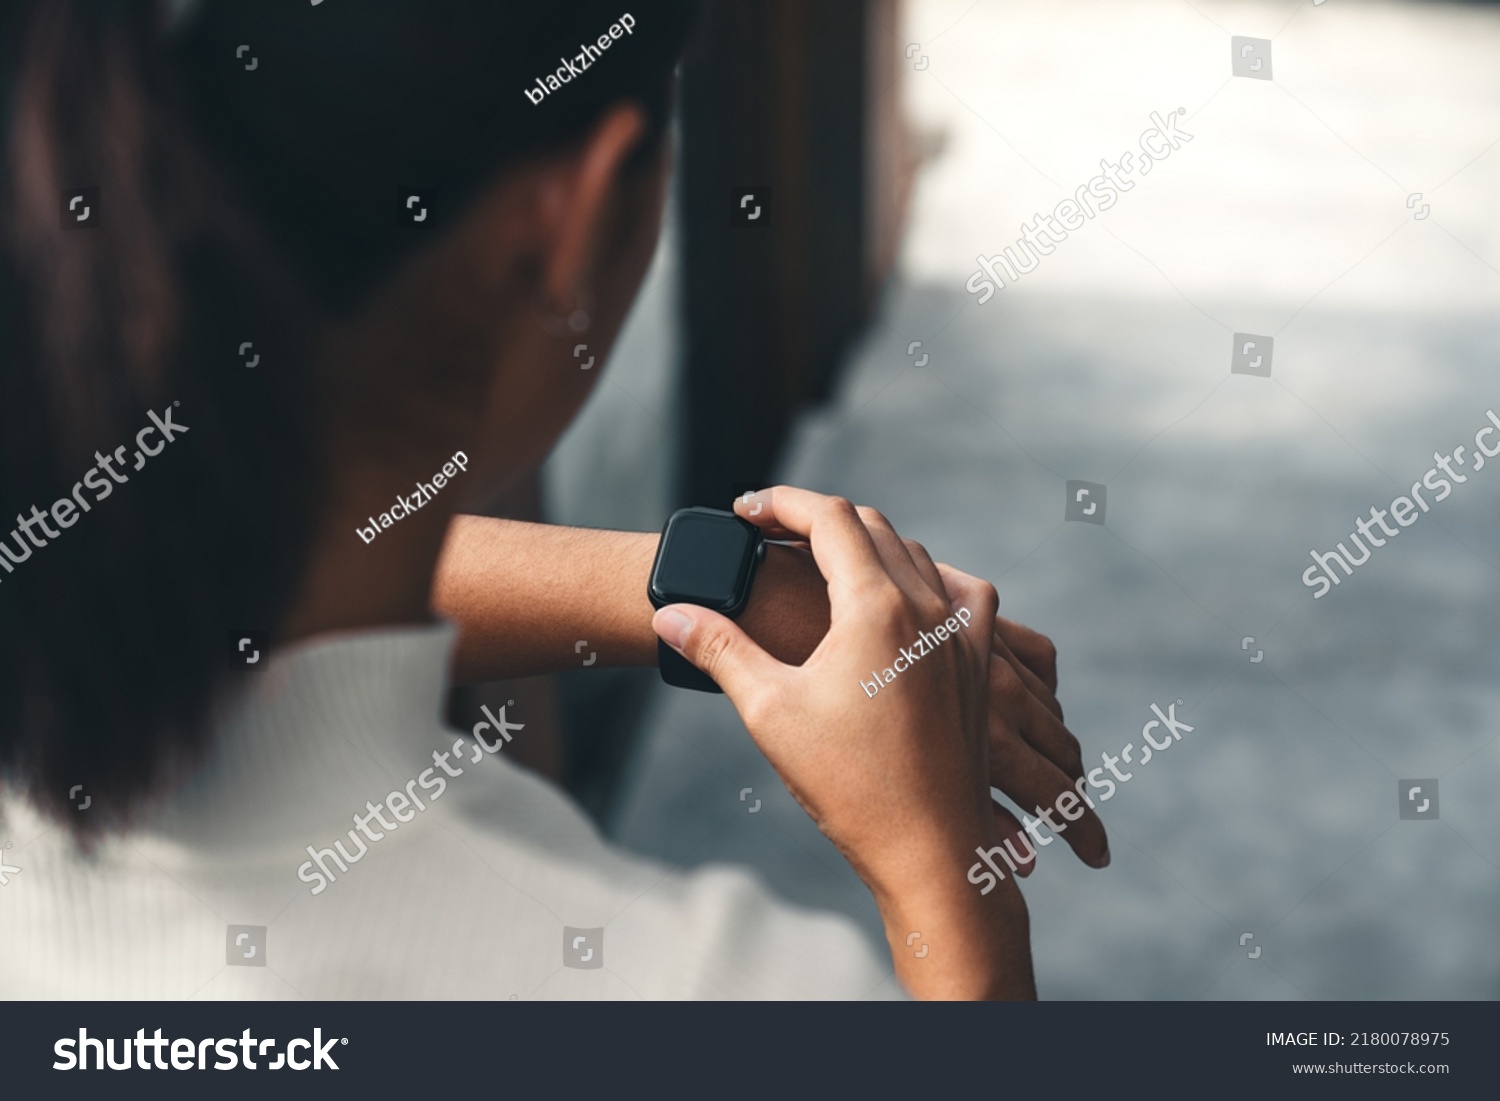 Woman using her Apple Watch